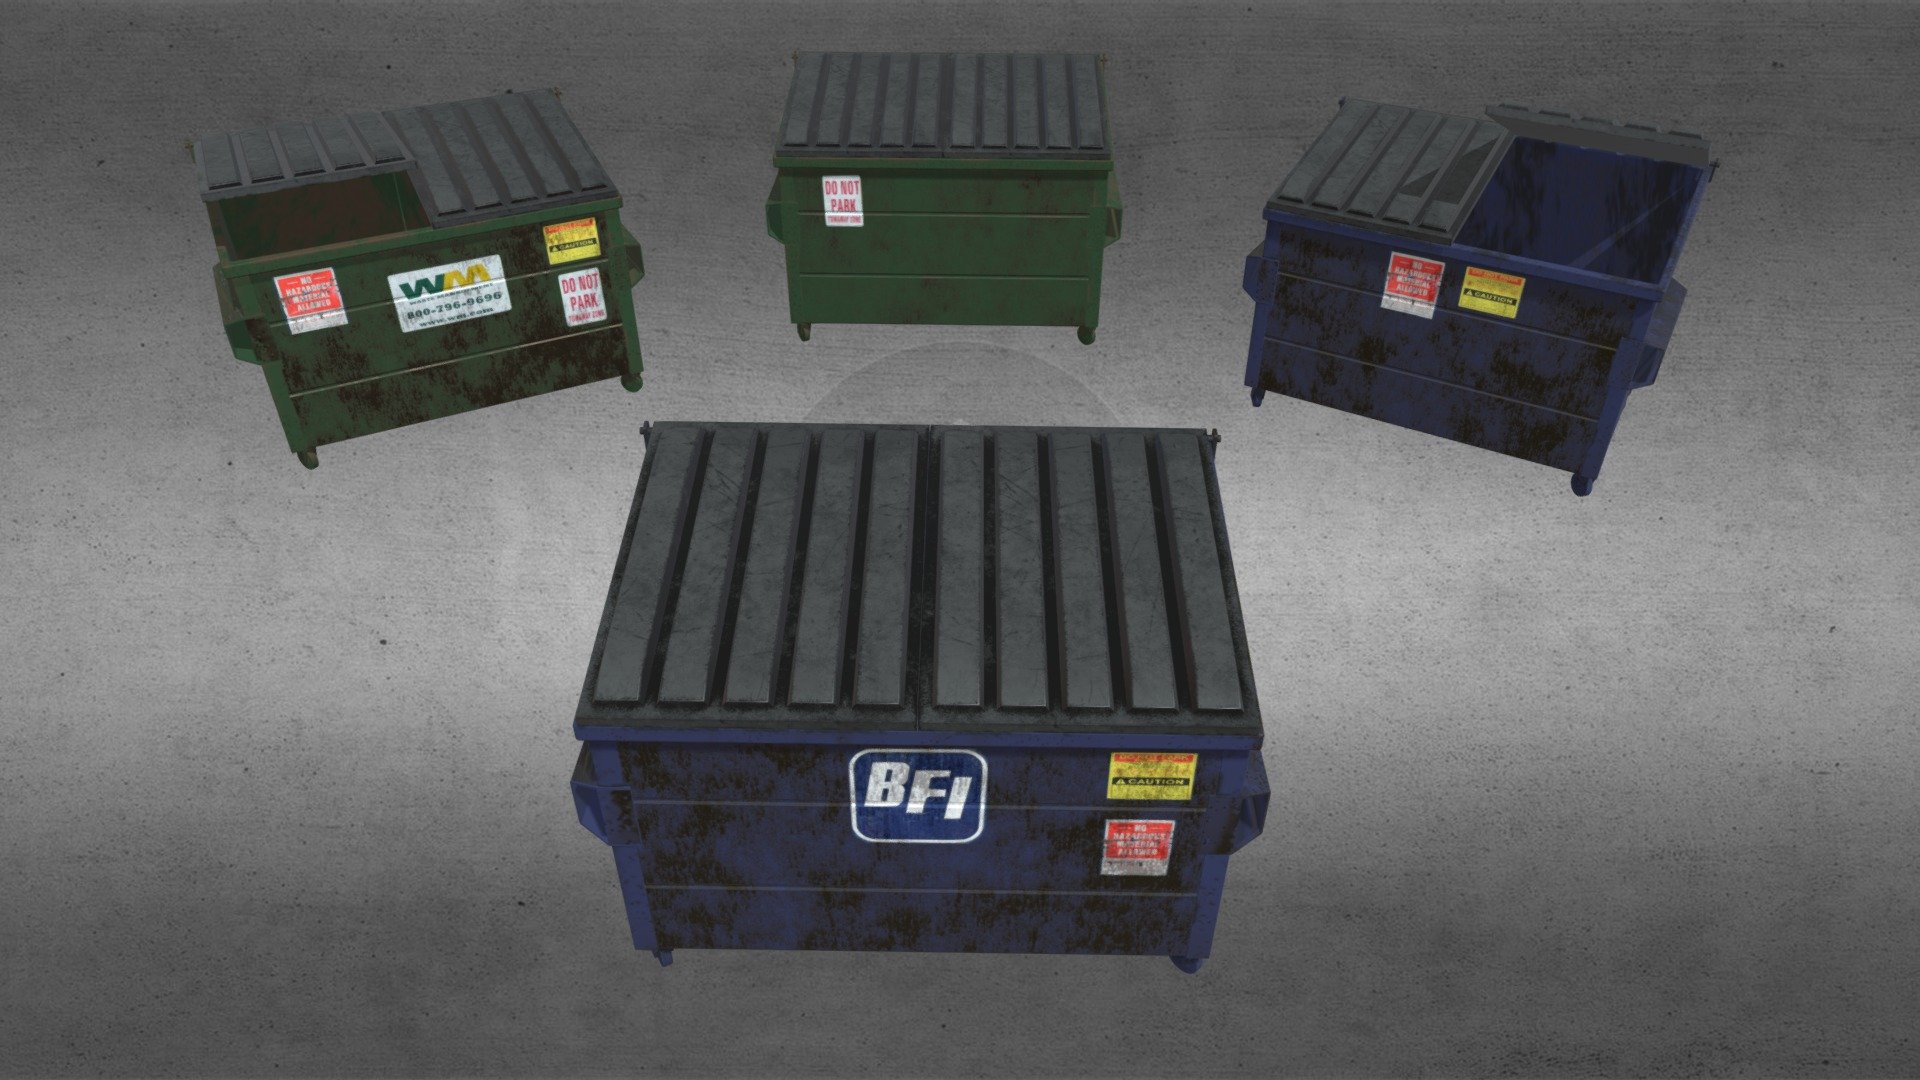 This dumpster has 4 different texture sets included to change the look. The dumpster model is low-poly and game-ready with about 5000 triangles. The lid on the dumpster can open.

Checkout my City Props Collection for other city models to help populate your city project.

Feel free to use for any project. Any feedback is welcome and appreciated. Thanks for checking out my models and the likes.




Check out all my other models including this most recent model.
 - Dumpster (low-poly, game-ready) - Download Free 3D model by TampaJoey 3d model